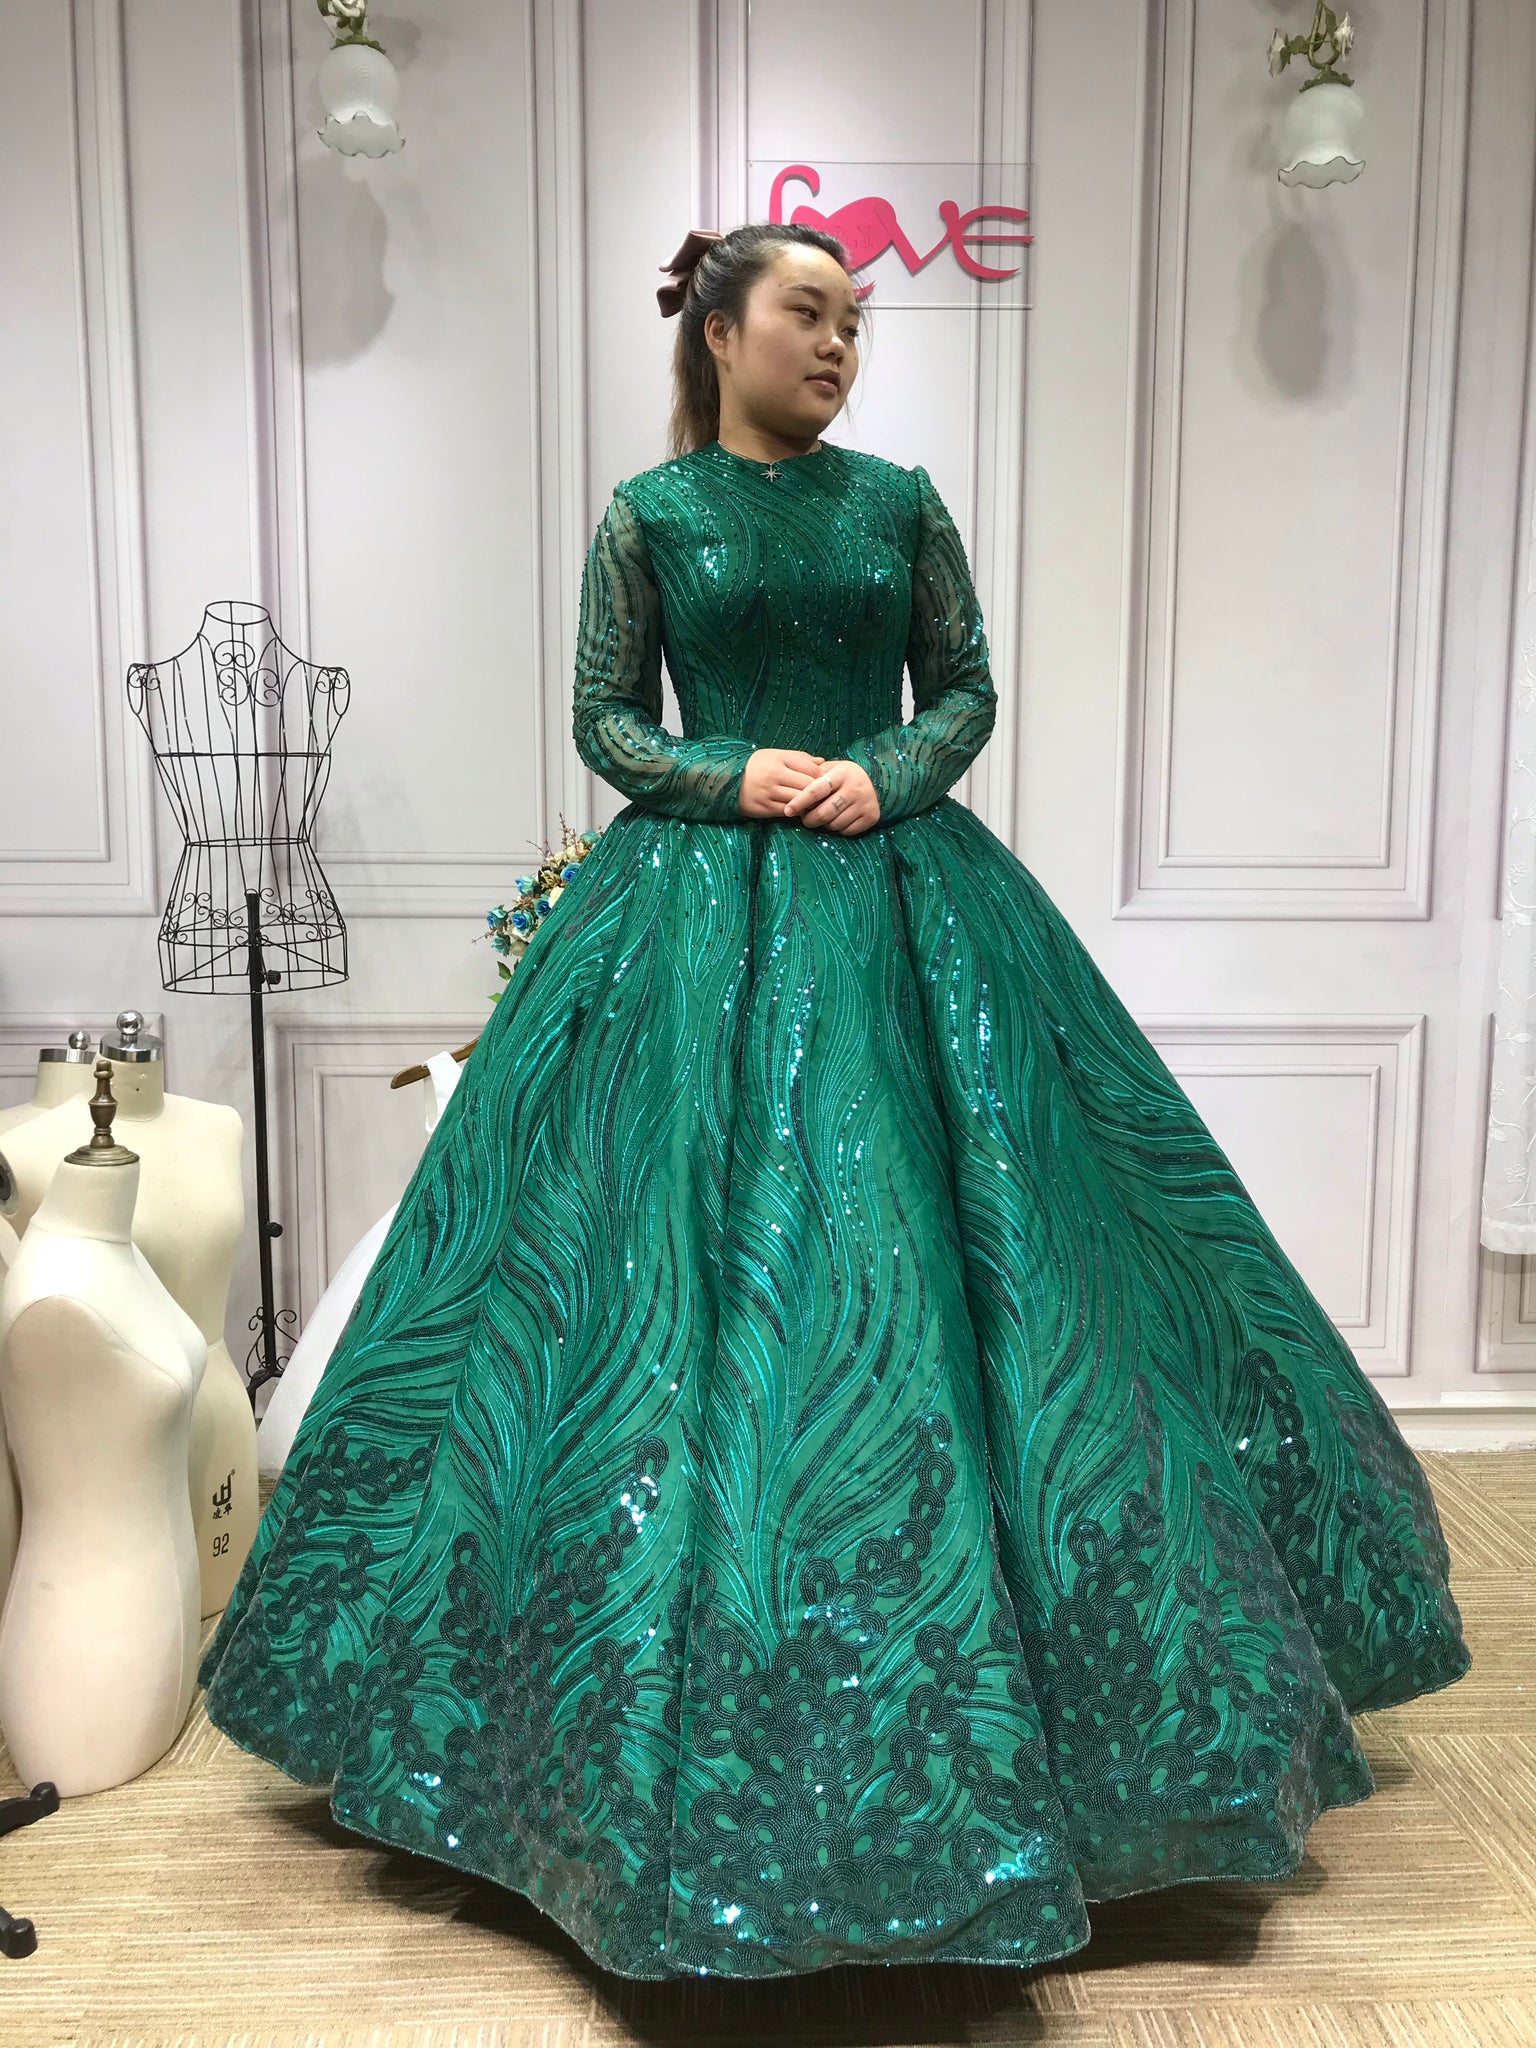 Modest Green Tulle Vneck Long Sleeves Prom Dress with Flower Patterns -  $159.3936 #P74138 - SheProm.com